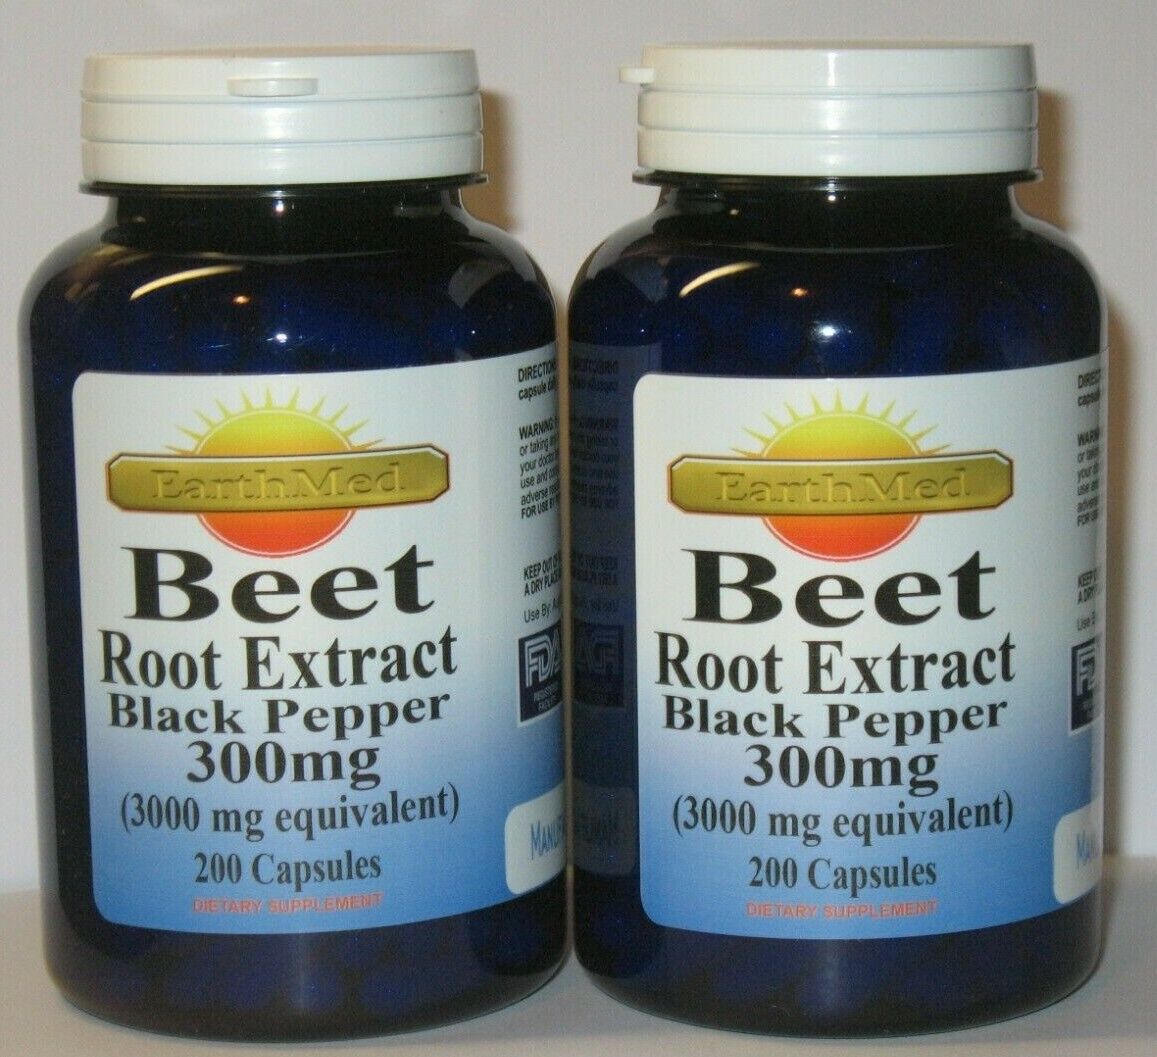 2x High Potency Beet Root Extract W/Black Pepper  3000mg 400 capsules total EarthMed